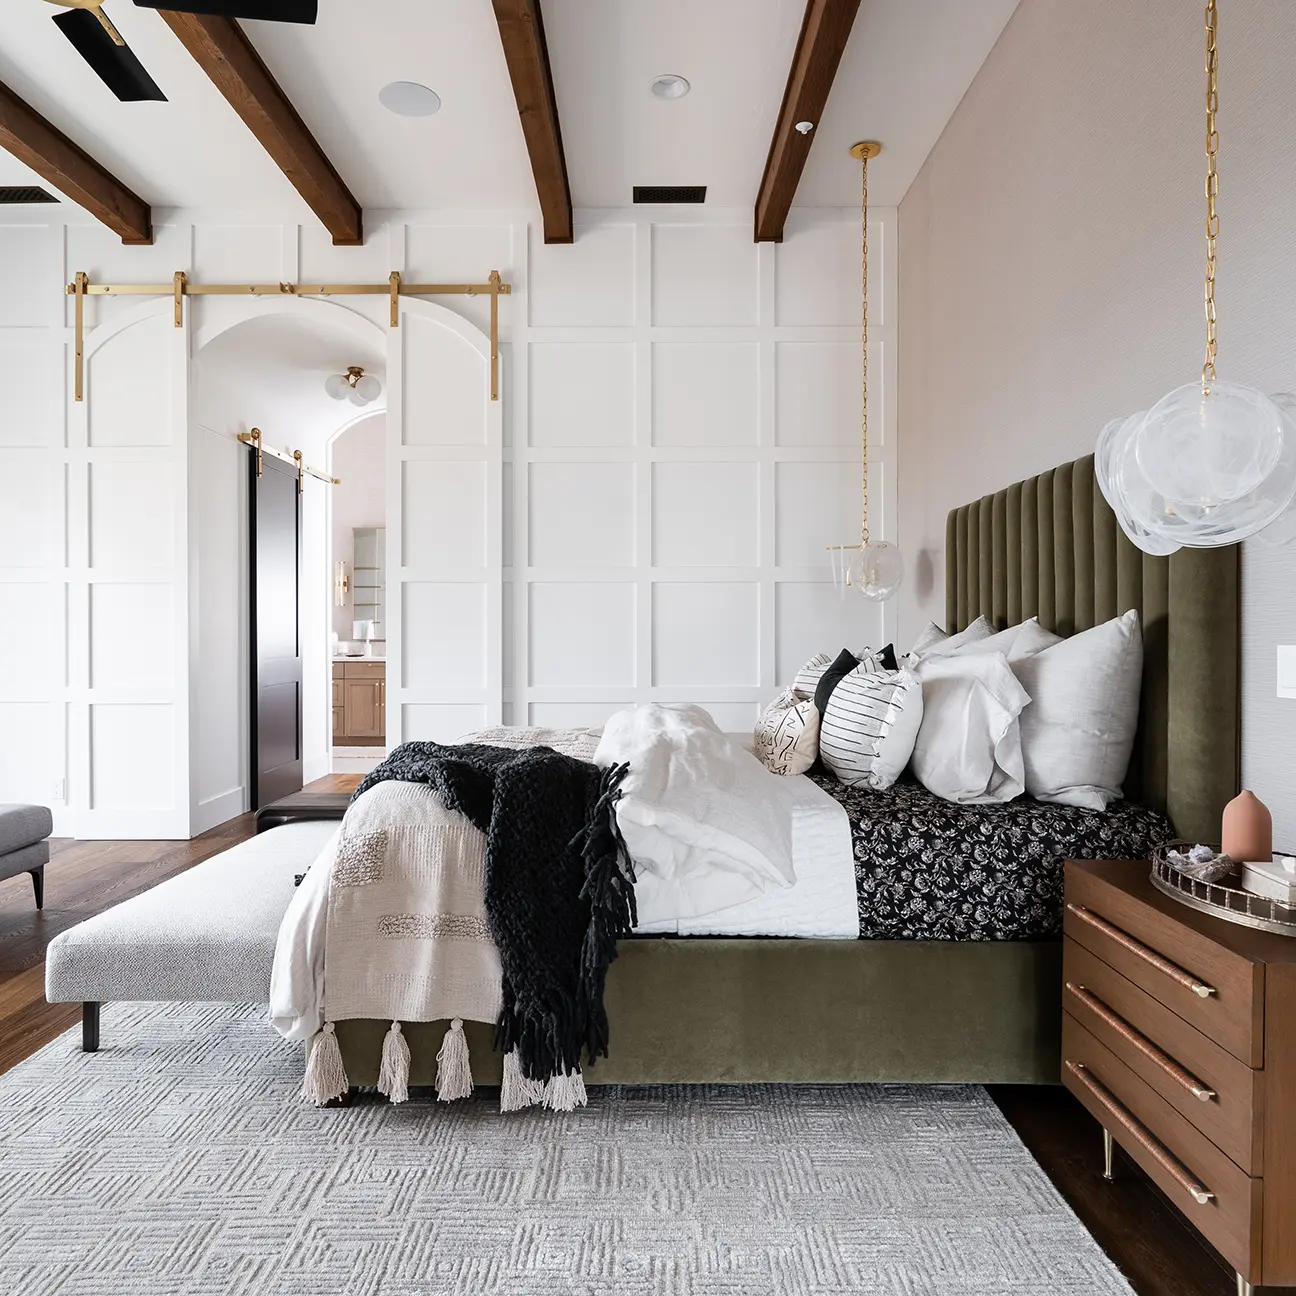 Beautiful Primary Bedroom Model with High Ceiling and wood beams